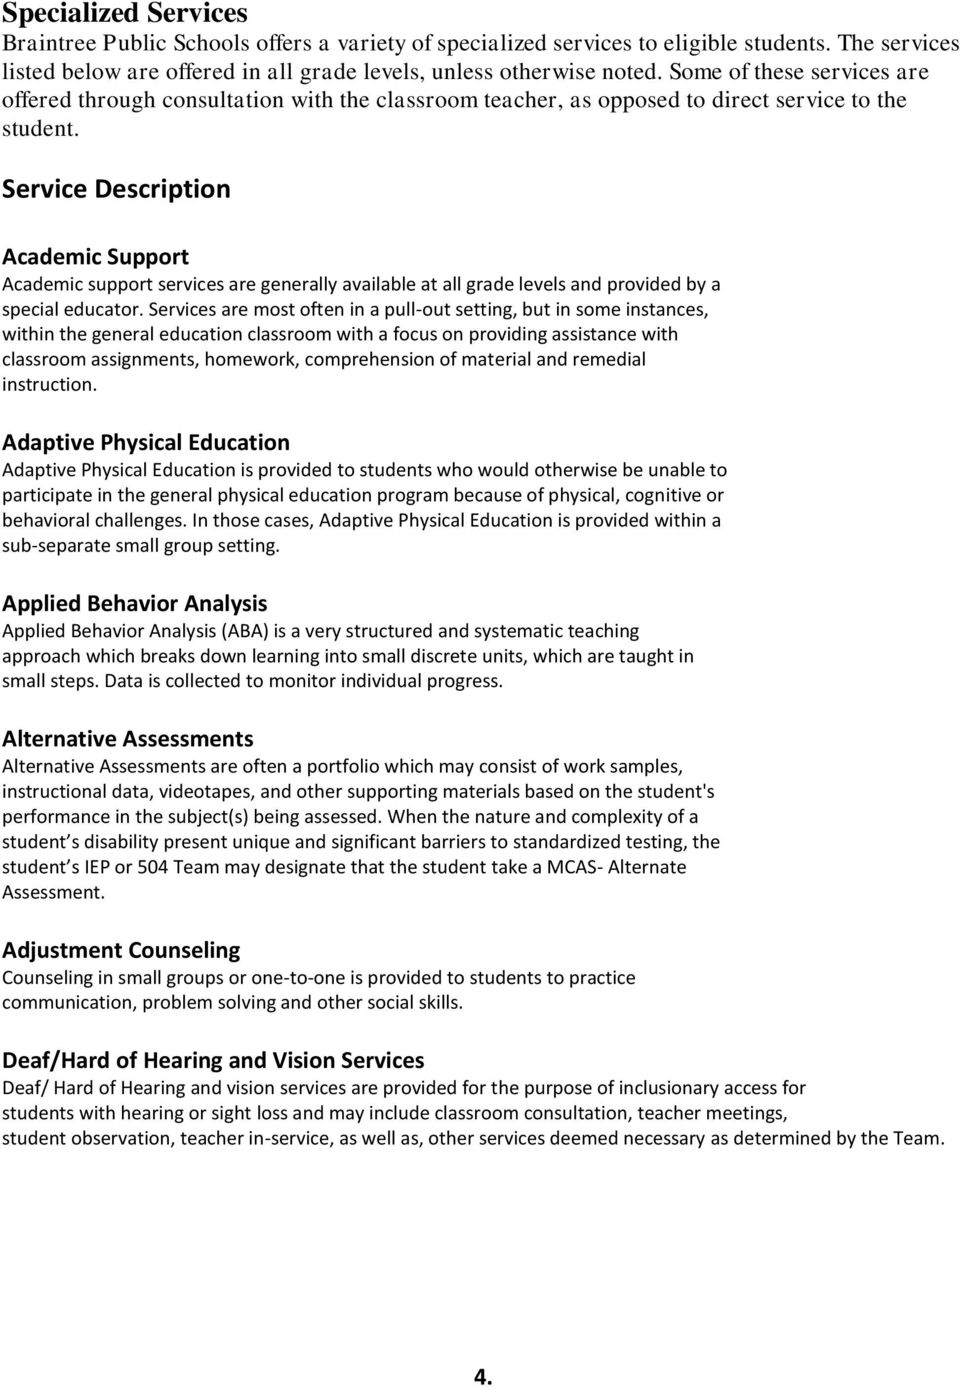 Service Description Academic Support Academic support services are generally available at all grade levels and provided by a special educator.